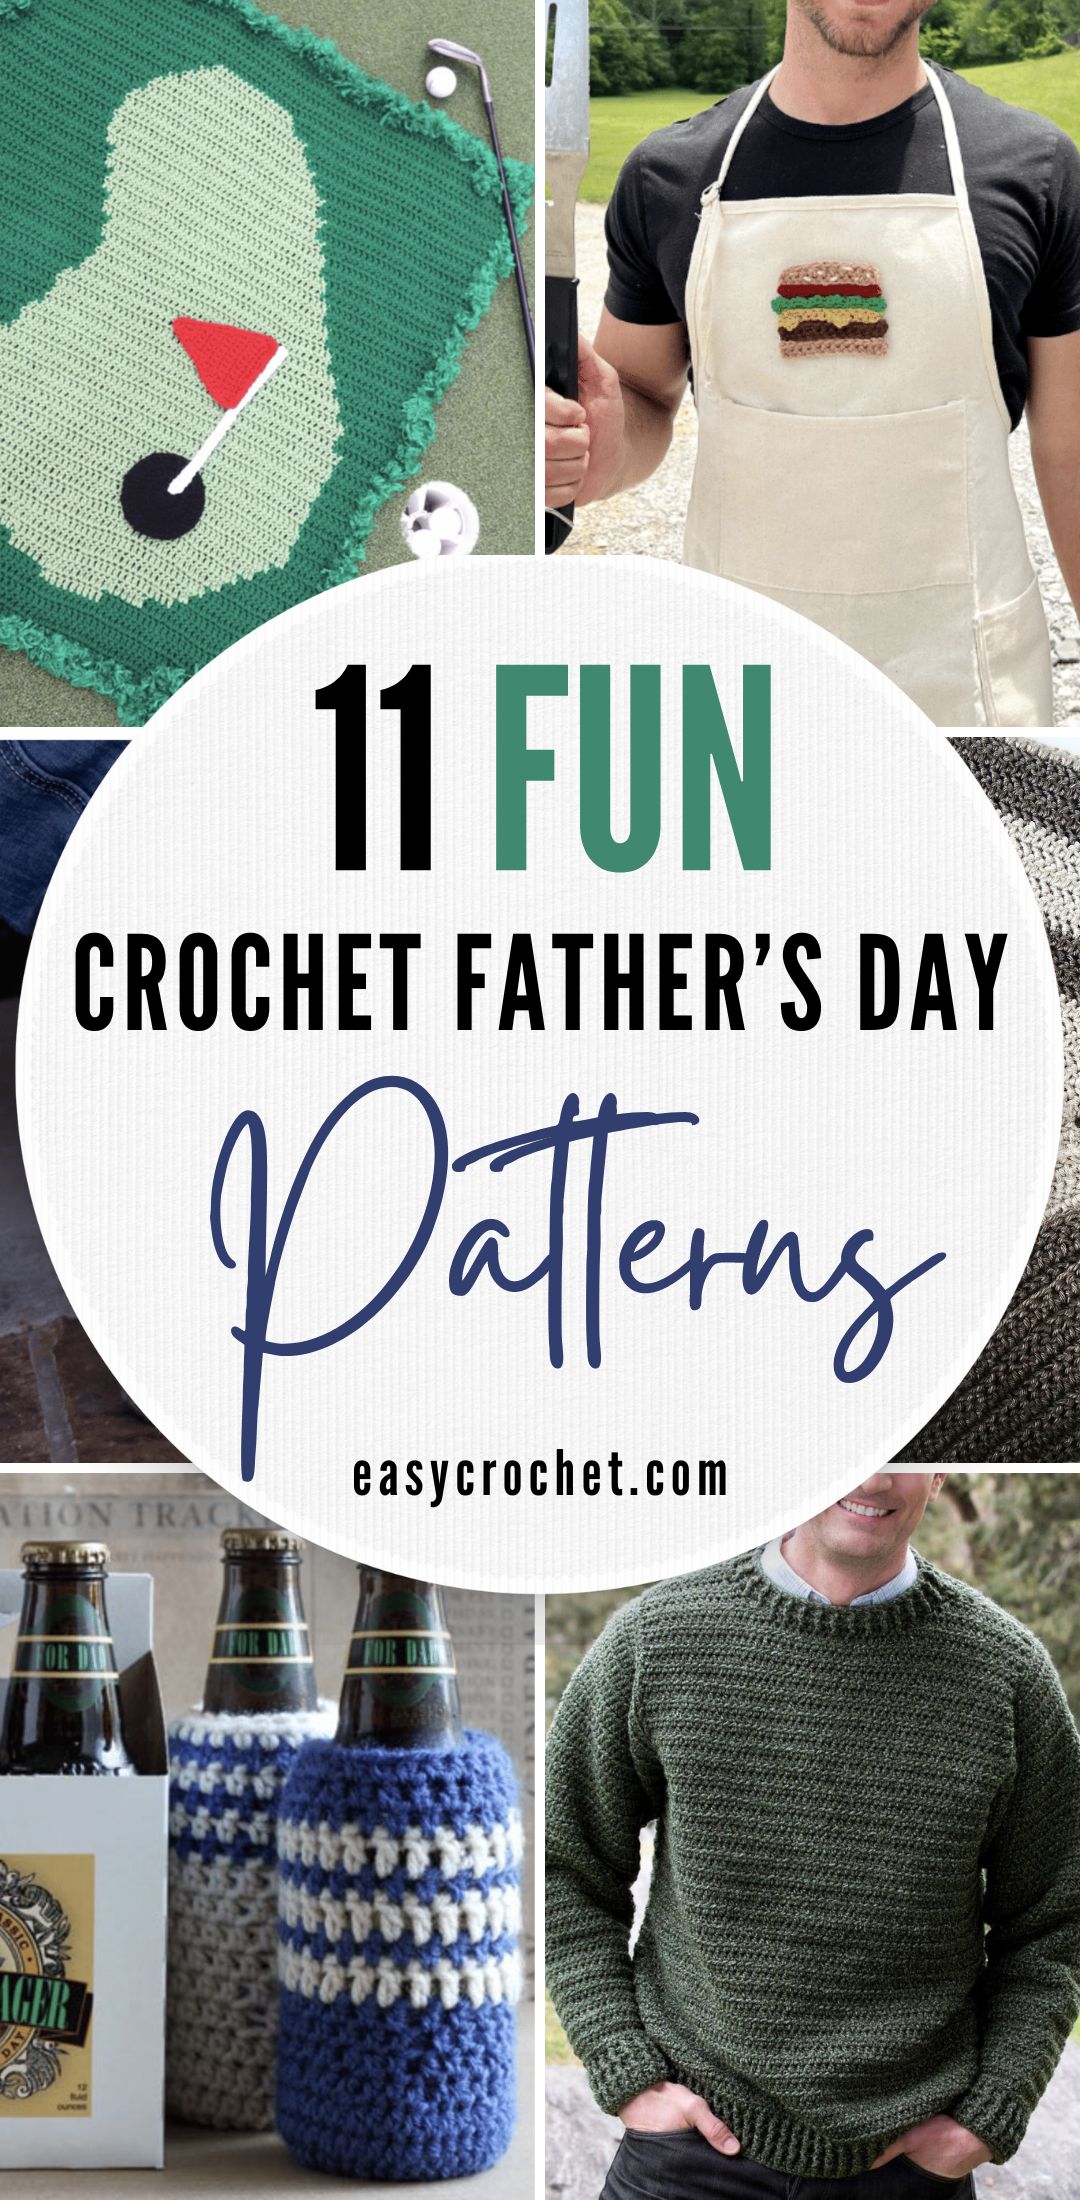 25 Crochet Gifts To Make For Father's Day - Handy Little Me